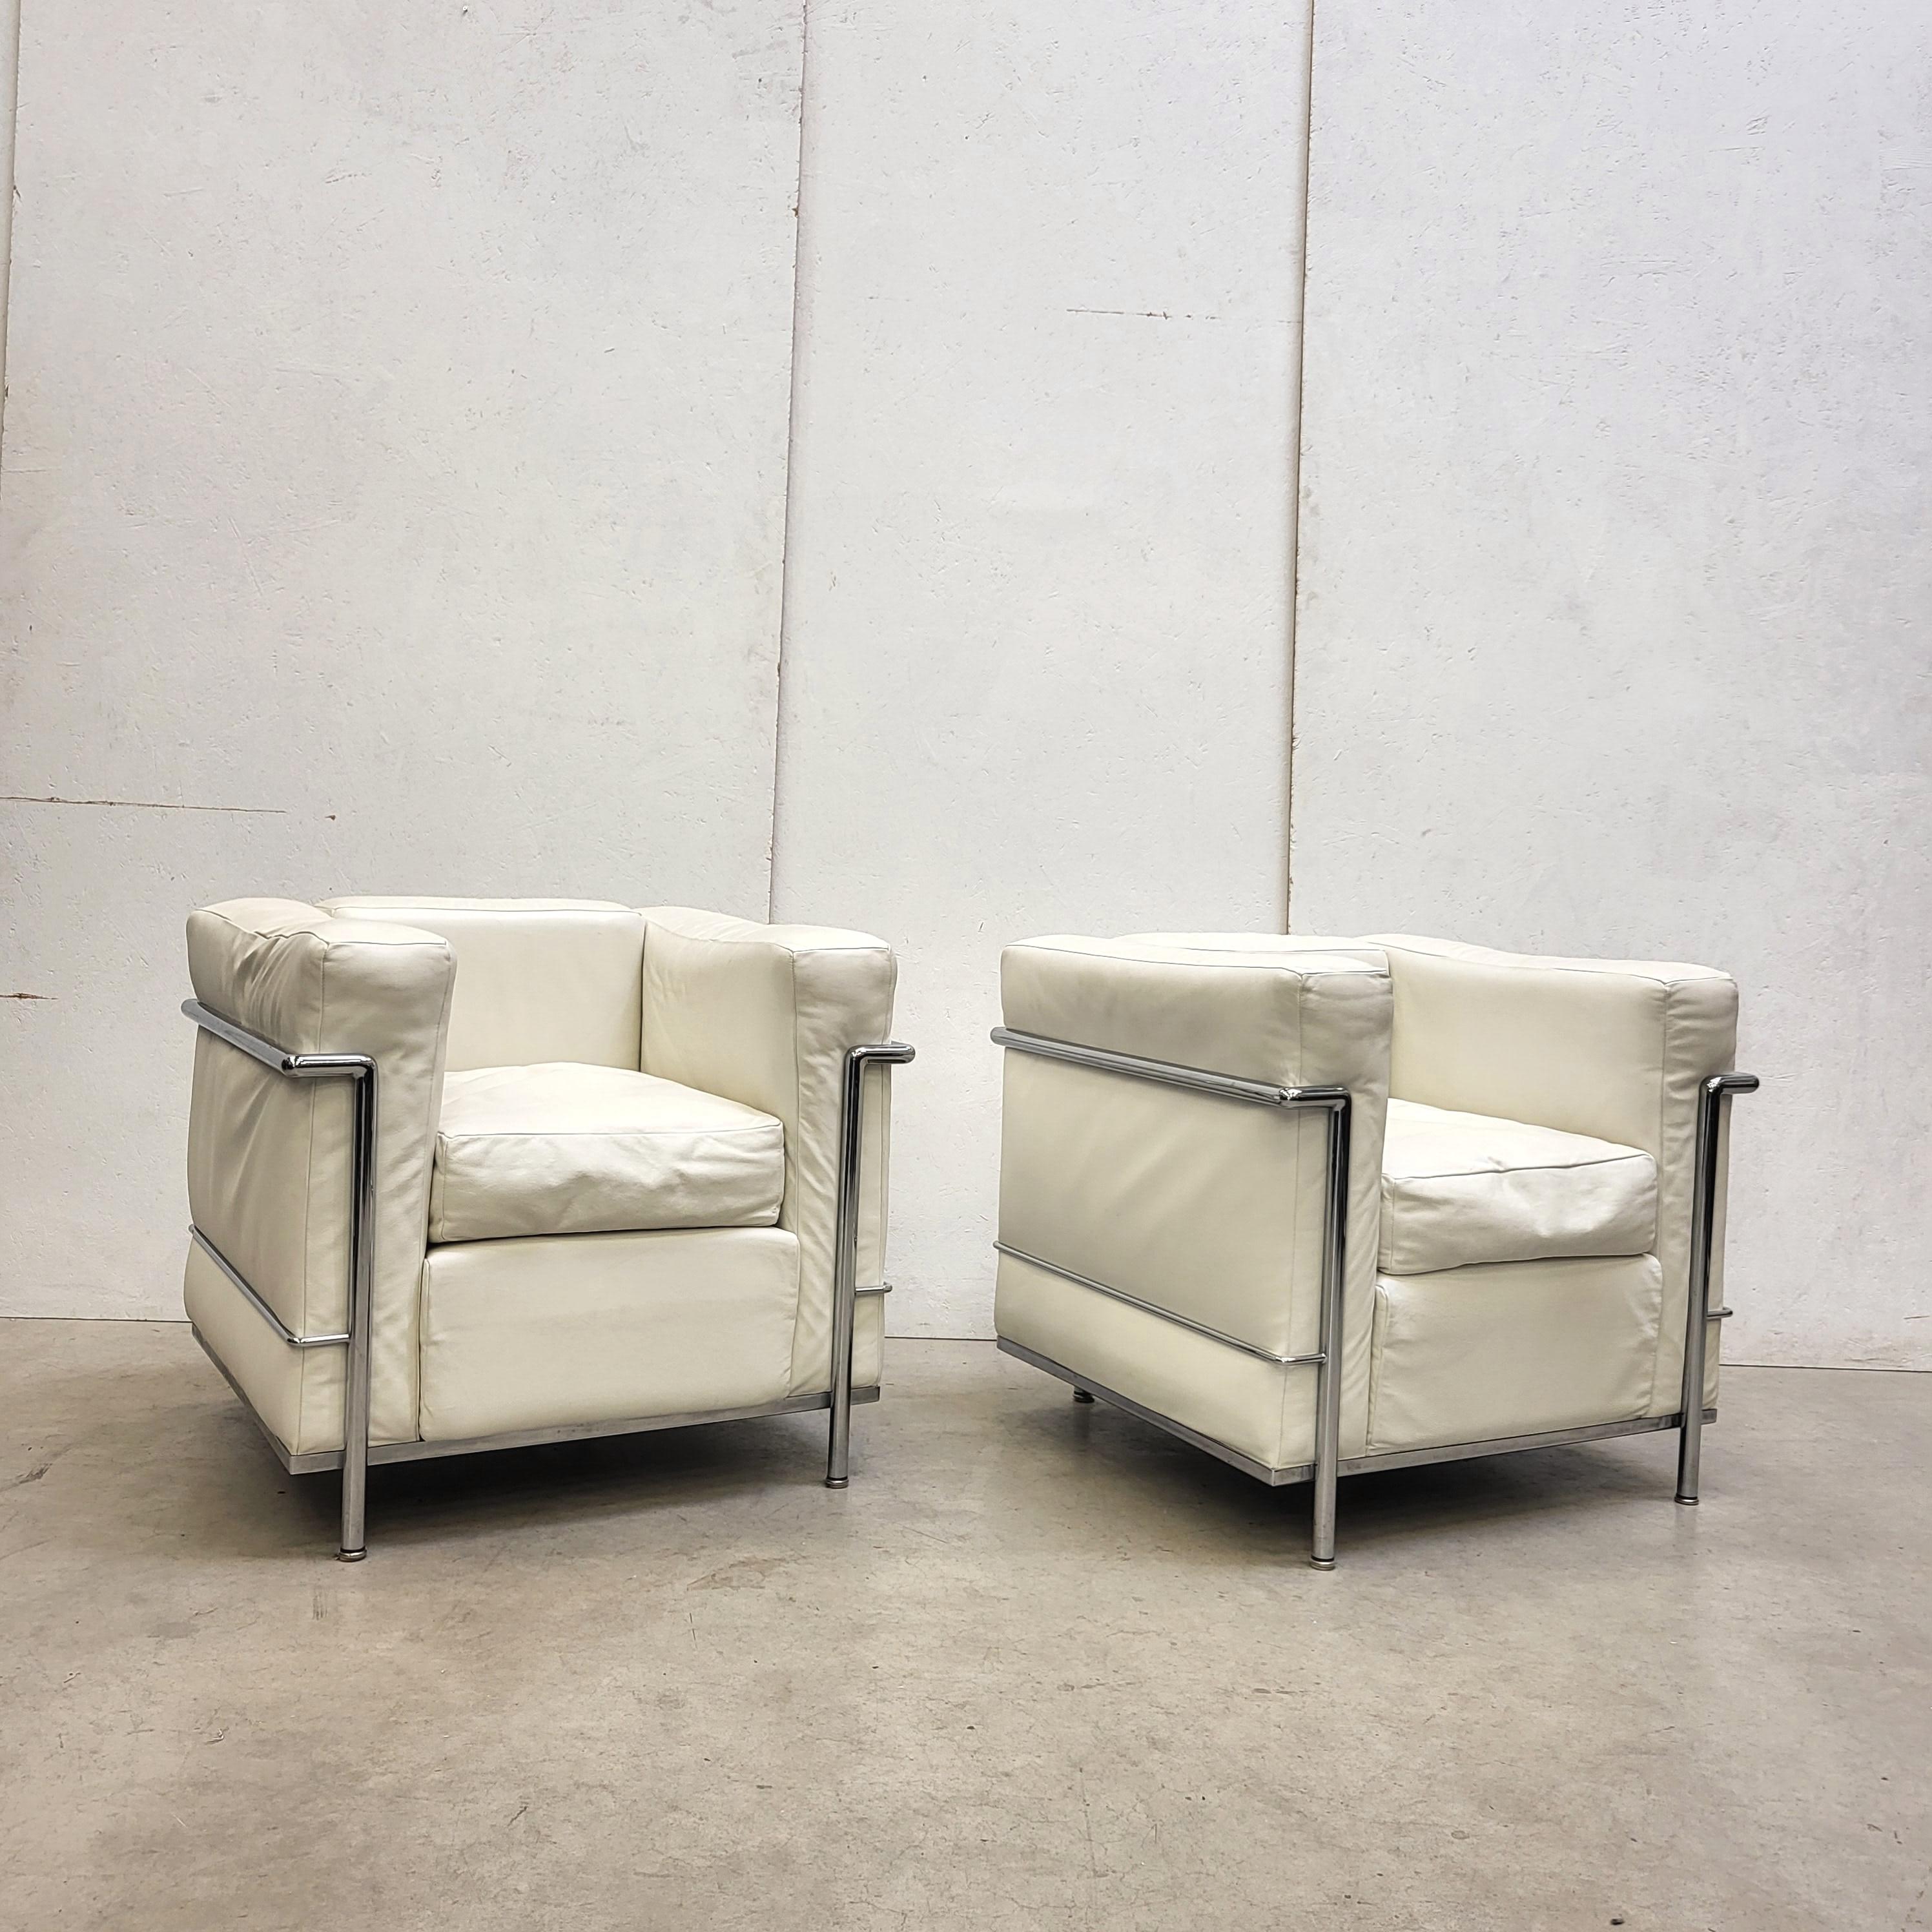 These timeless iconic chairs by Le Corbusier model LC2 were designed in 1928 by Le Corbusier and produced by Cassina in the 1970s. These club chairs coming from the first series and having a very low production number, here No 550 and 743.

The